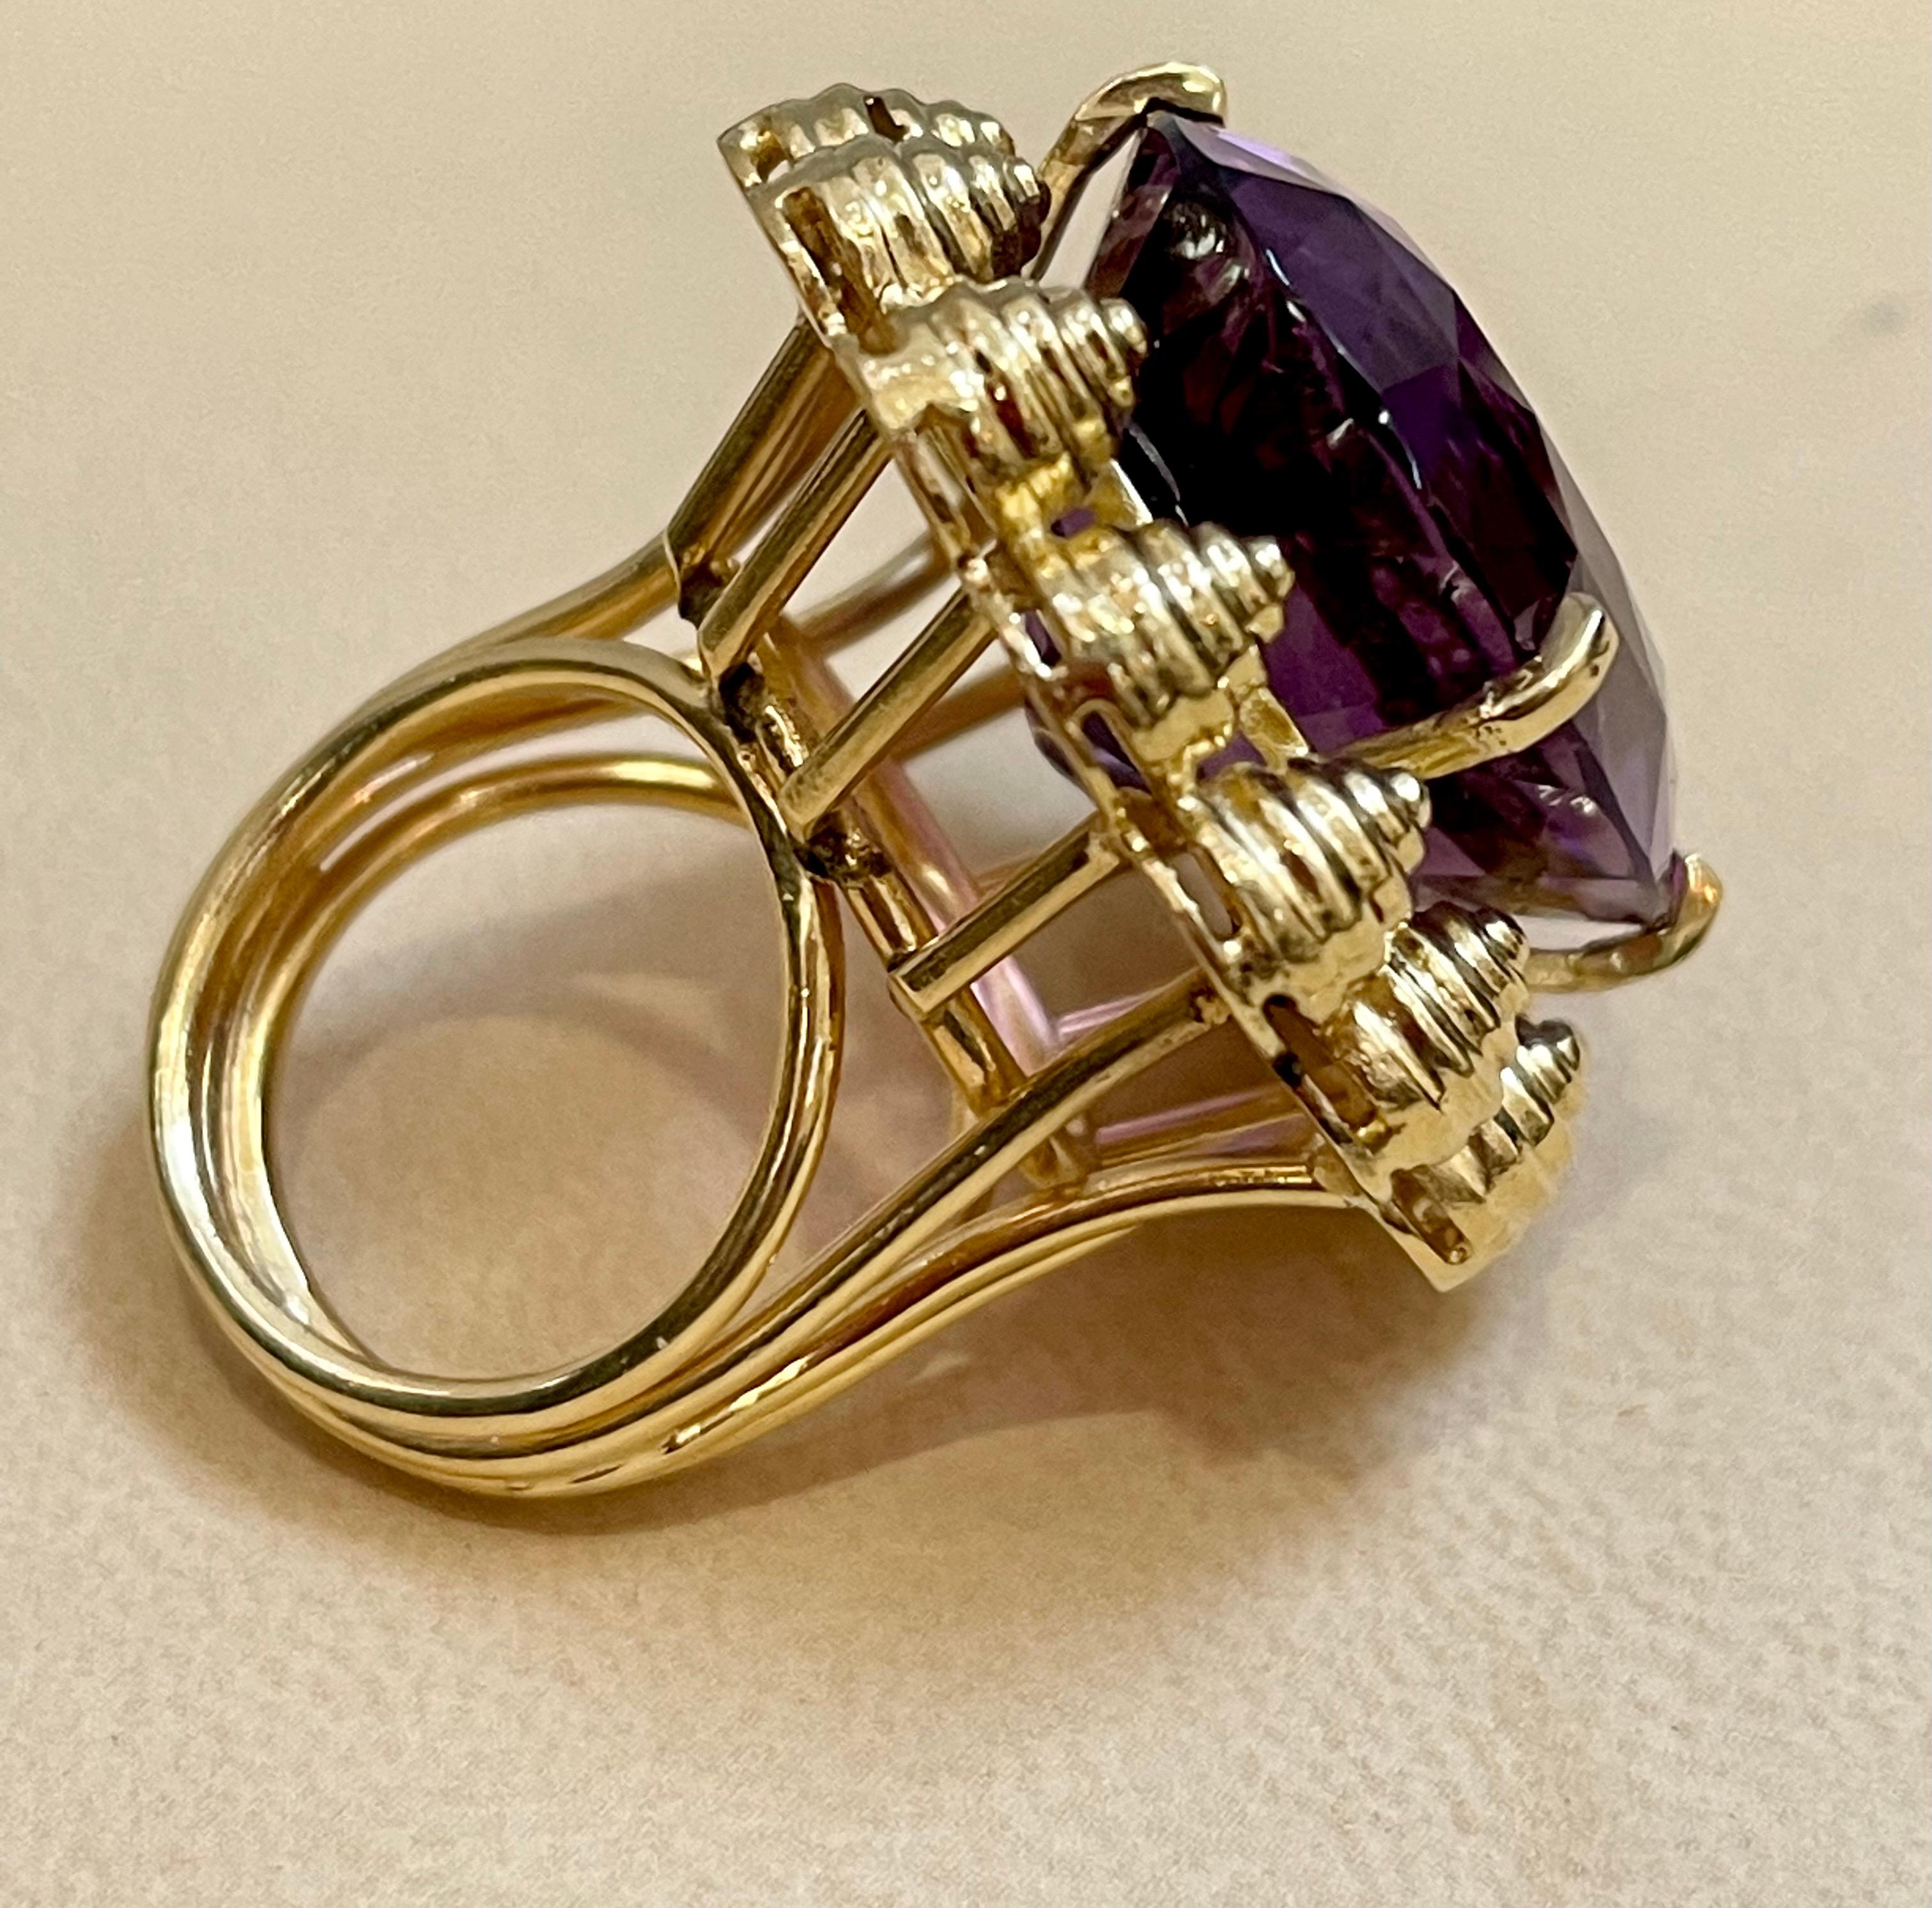 Oval Cut 50 Carat Amethyst Cocktail Ring in Solid 18 Karat Yellow Gold 29 Grams For Sale